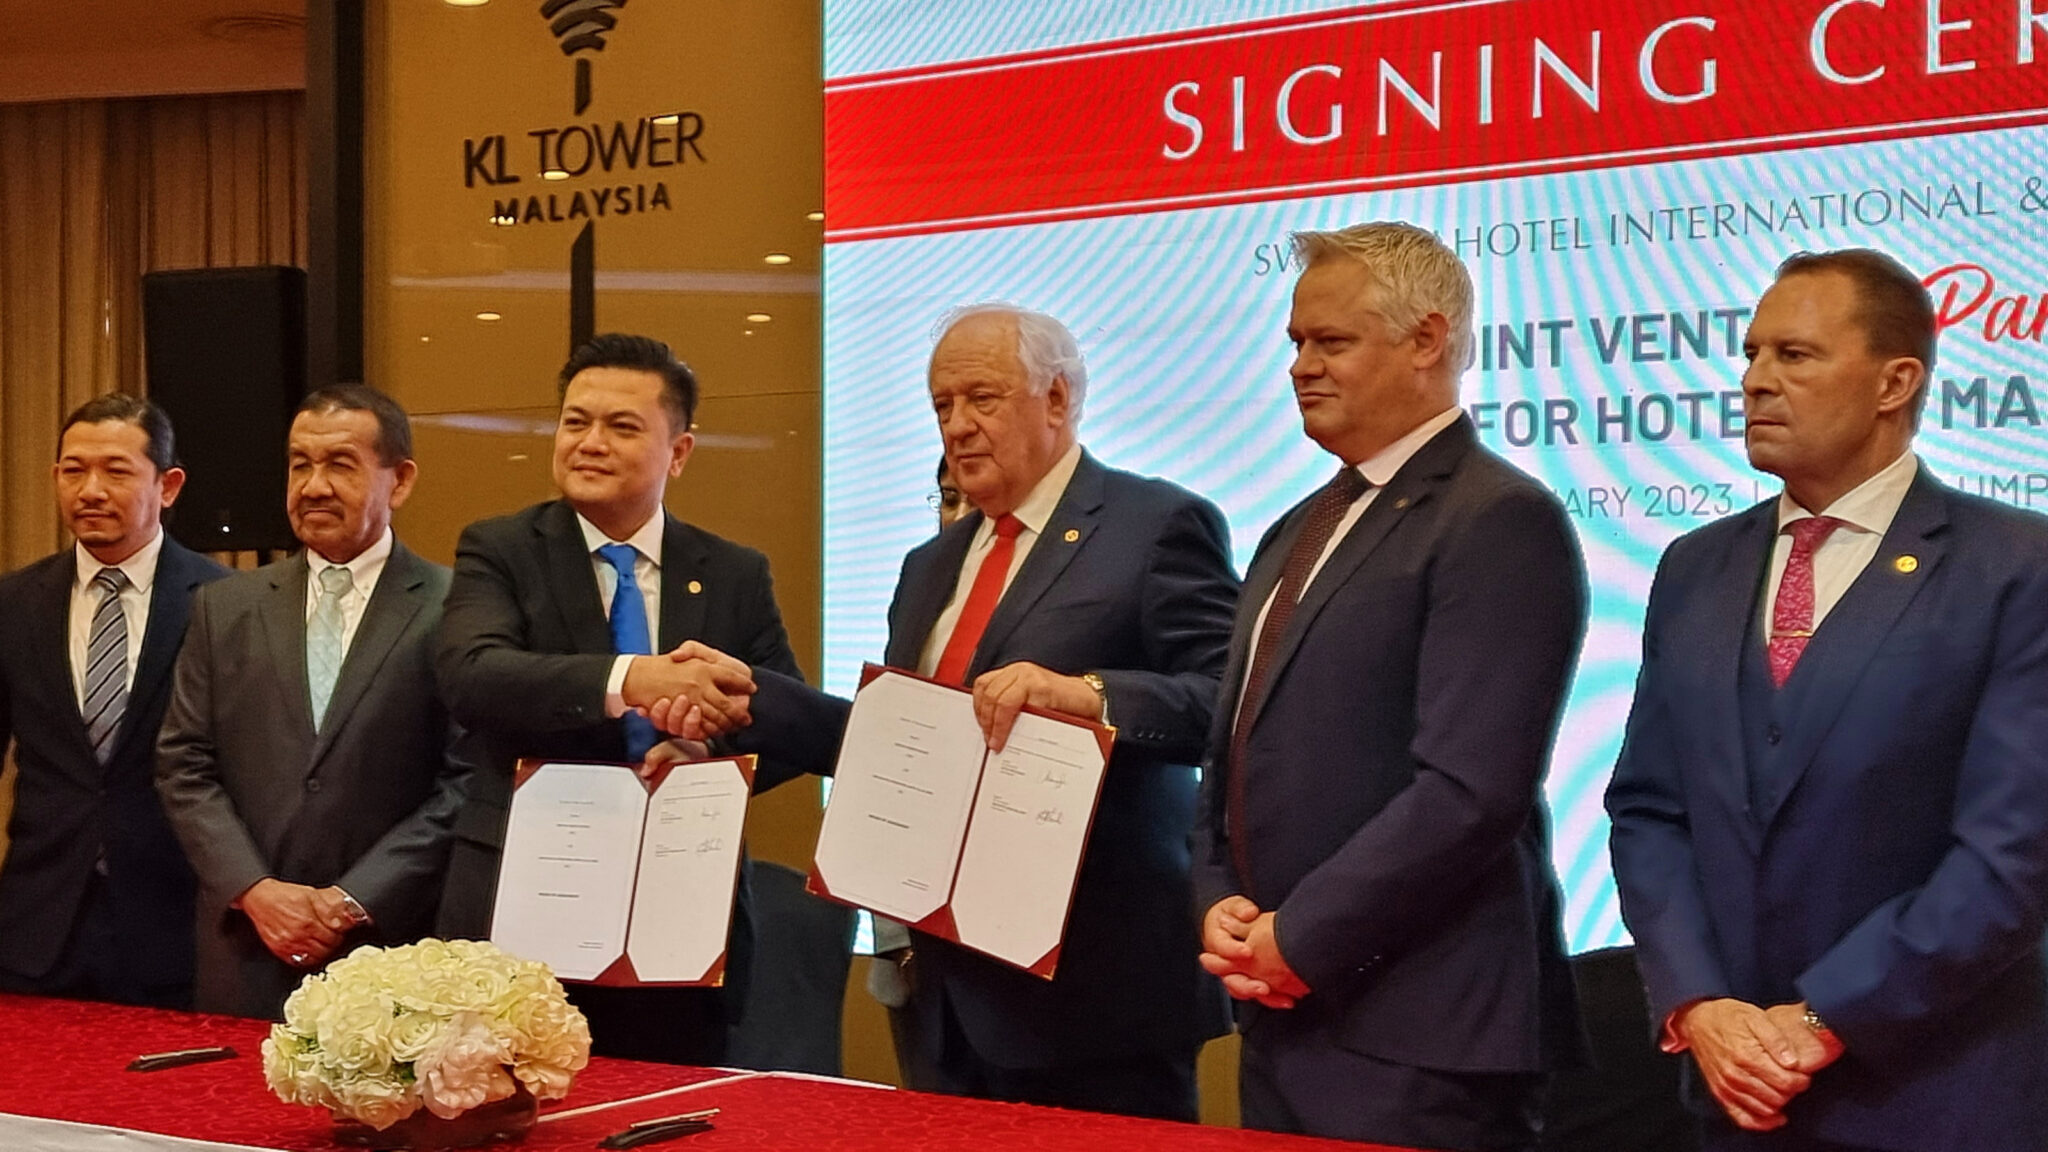 swiss-belhotel-international-plans-ambitious-growth-in-malaysia-through-joint-venture-with-nautical-insight-sdn-bhd